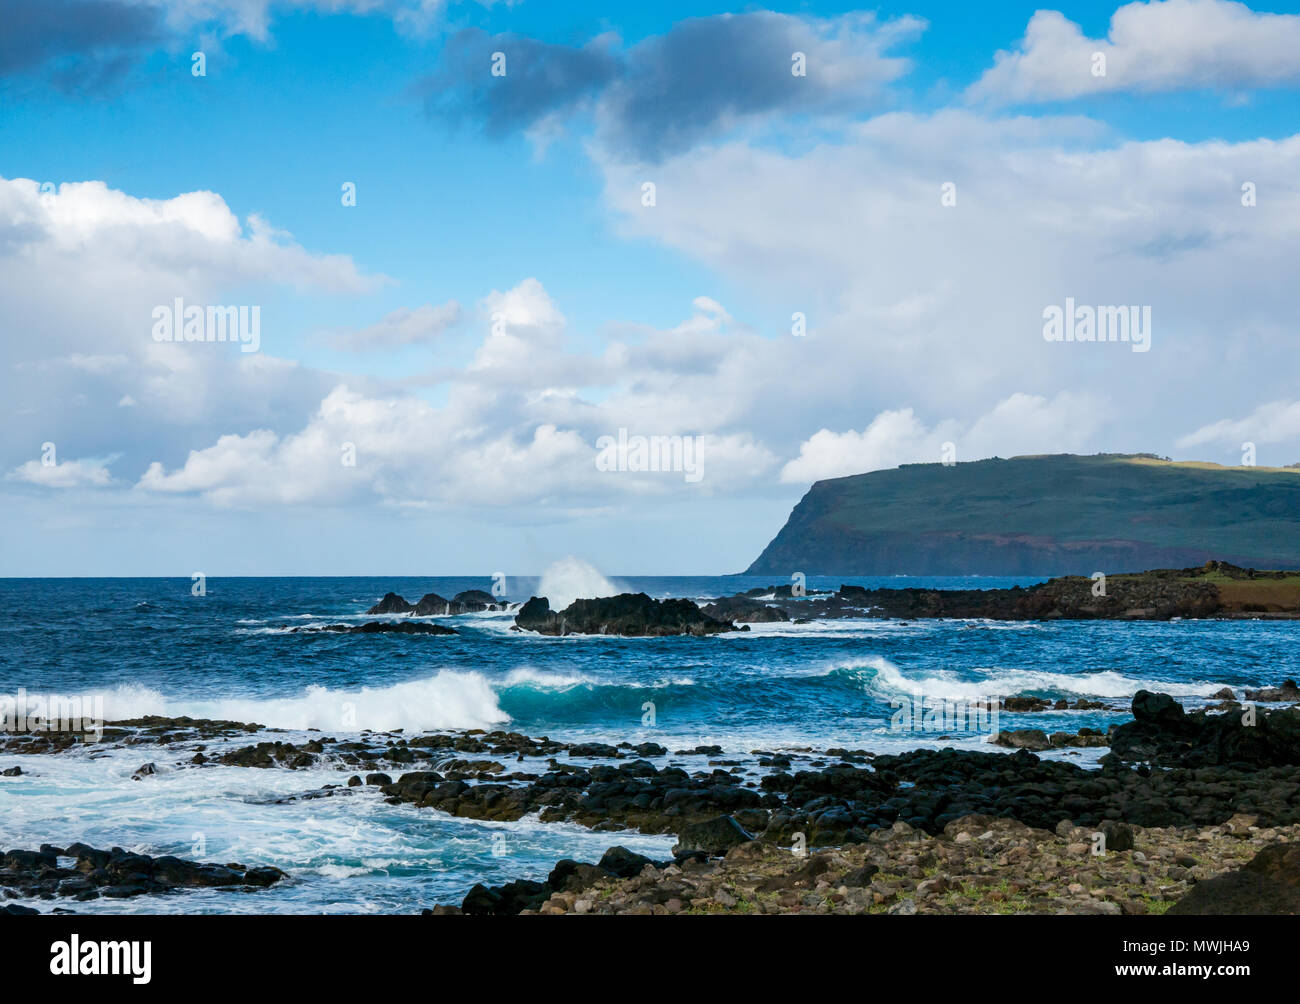 Ocean waves breaking on rocky shore, South coast of Easter Island, Rapa Nui, Chile, with view of extinct volcano Rano Kau Stock Photo